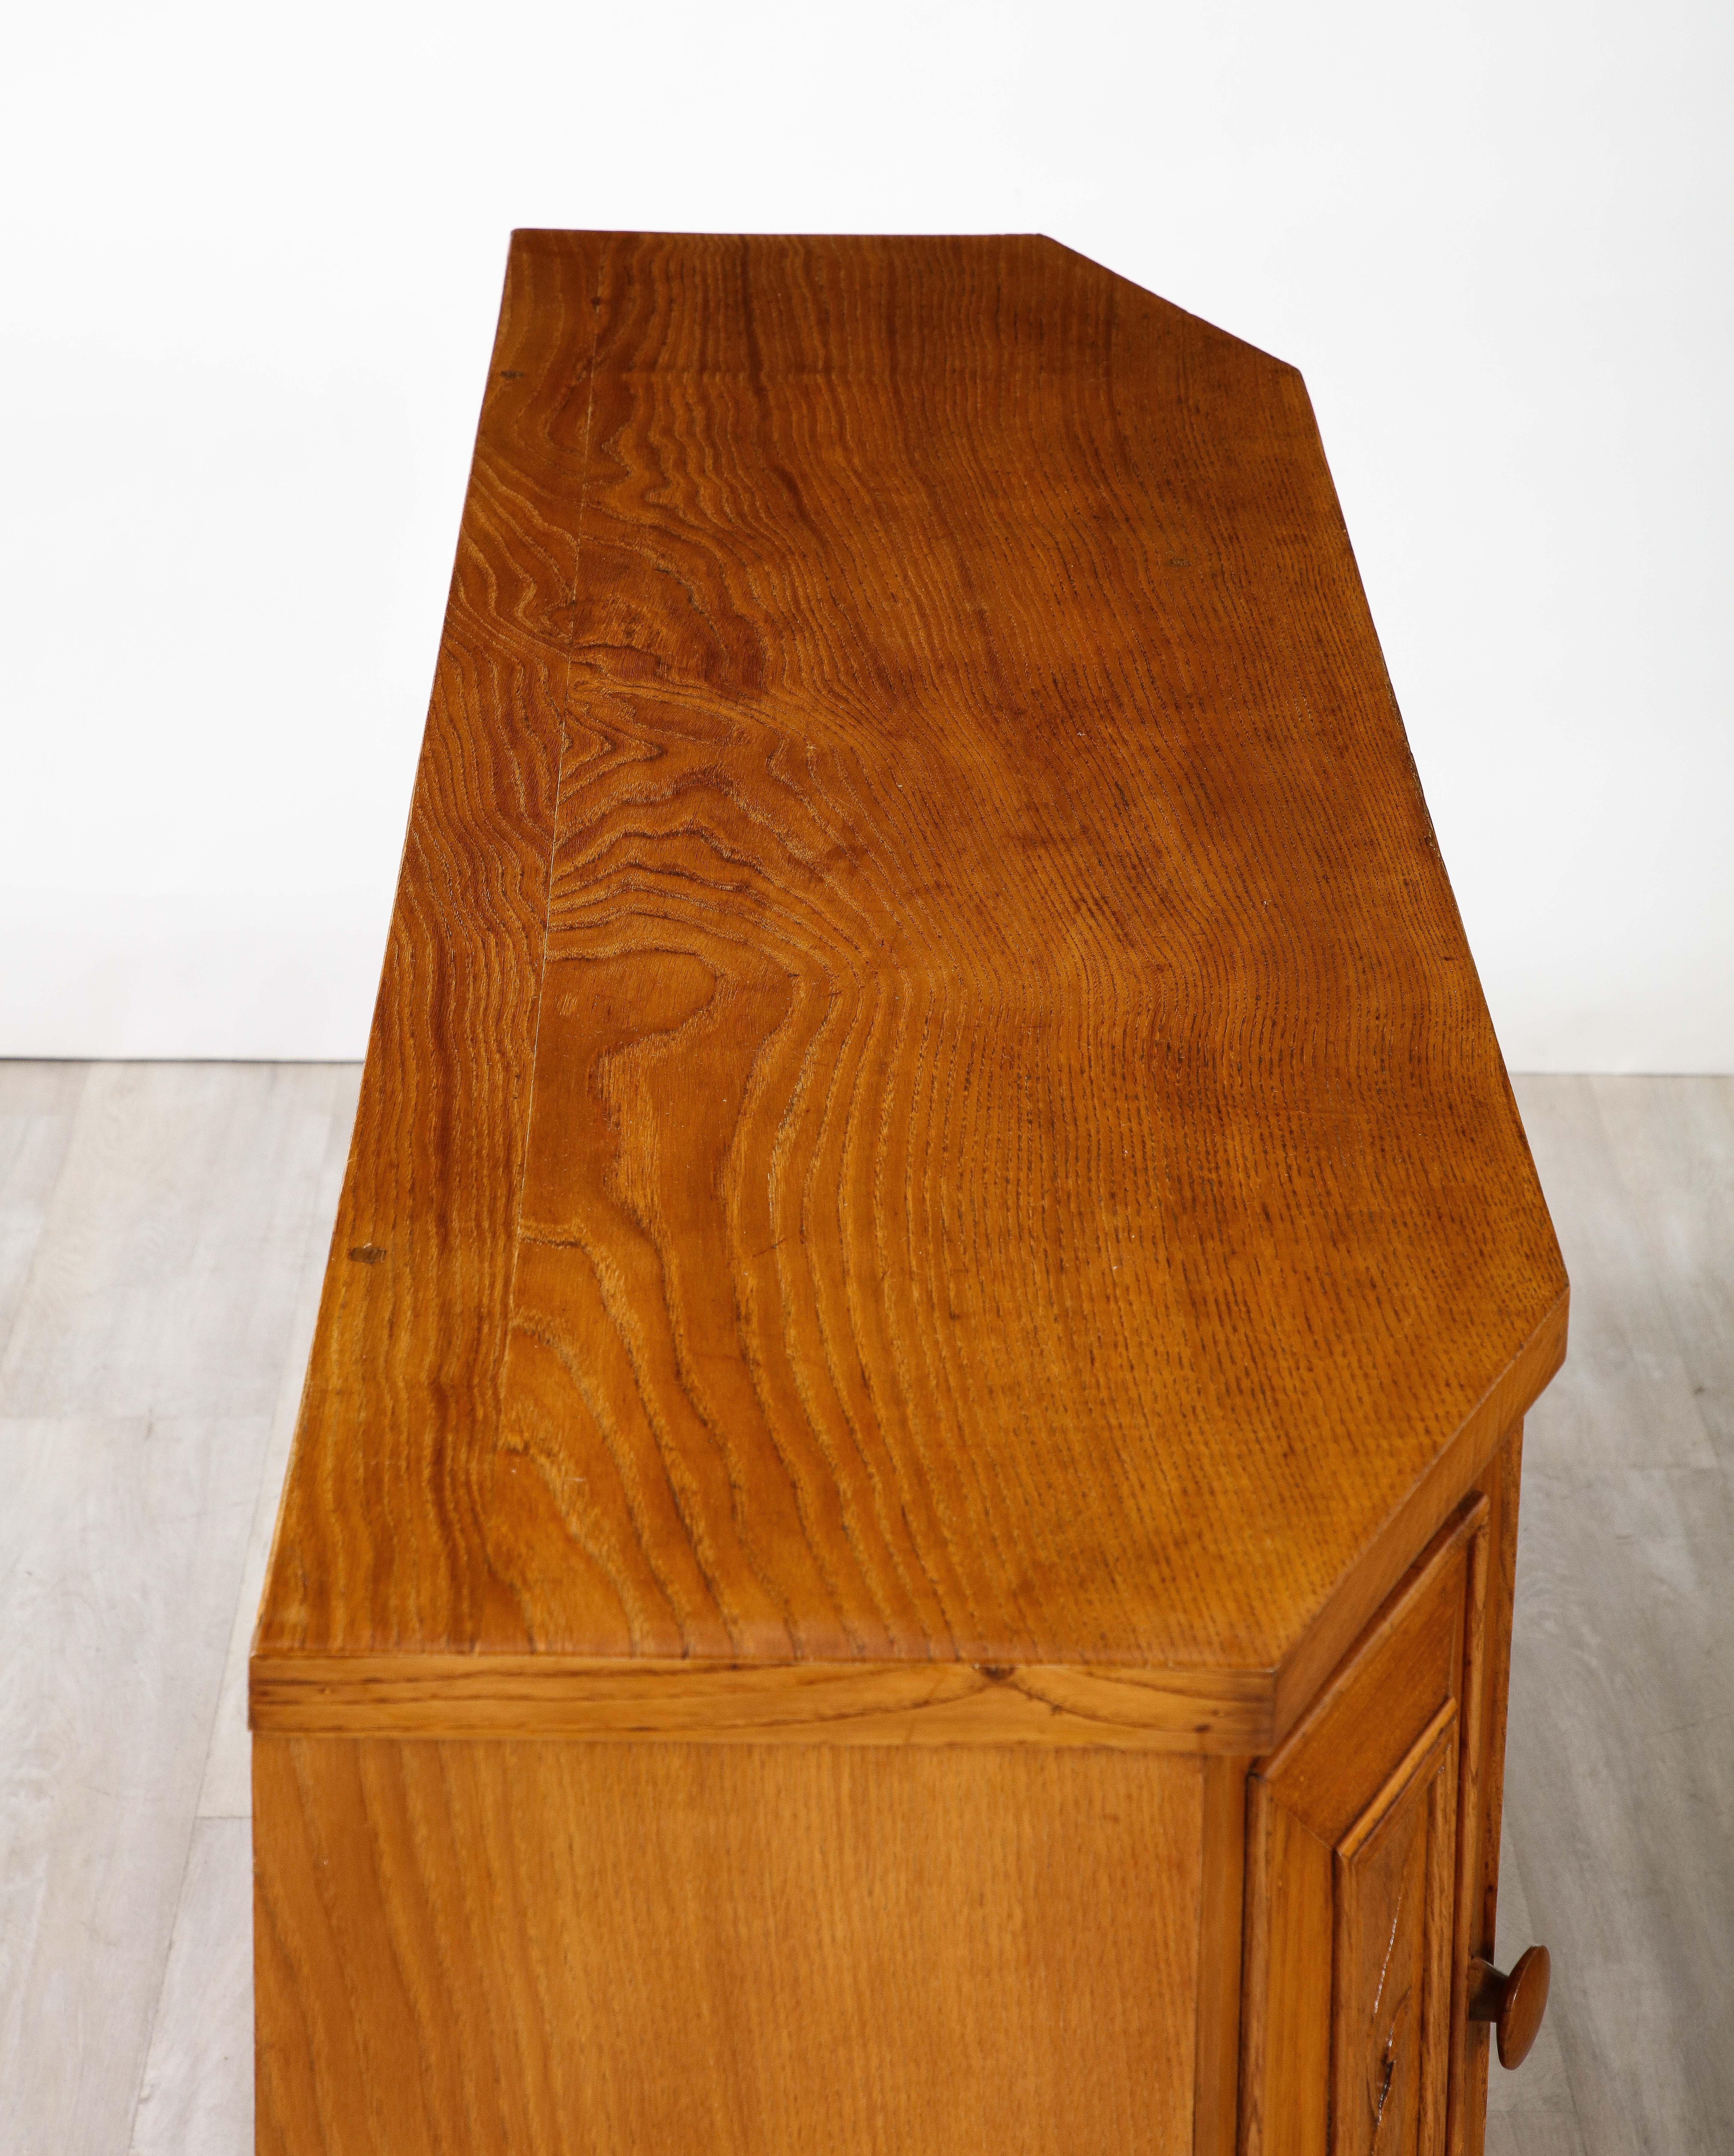 Italian Tuscan Art Deco Carved Oak Sideboard or Credenza, circa 1940 For Sale 7